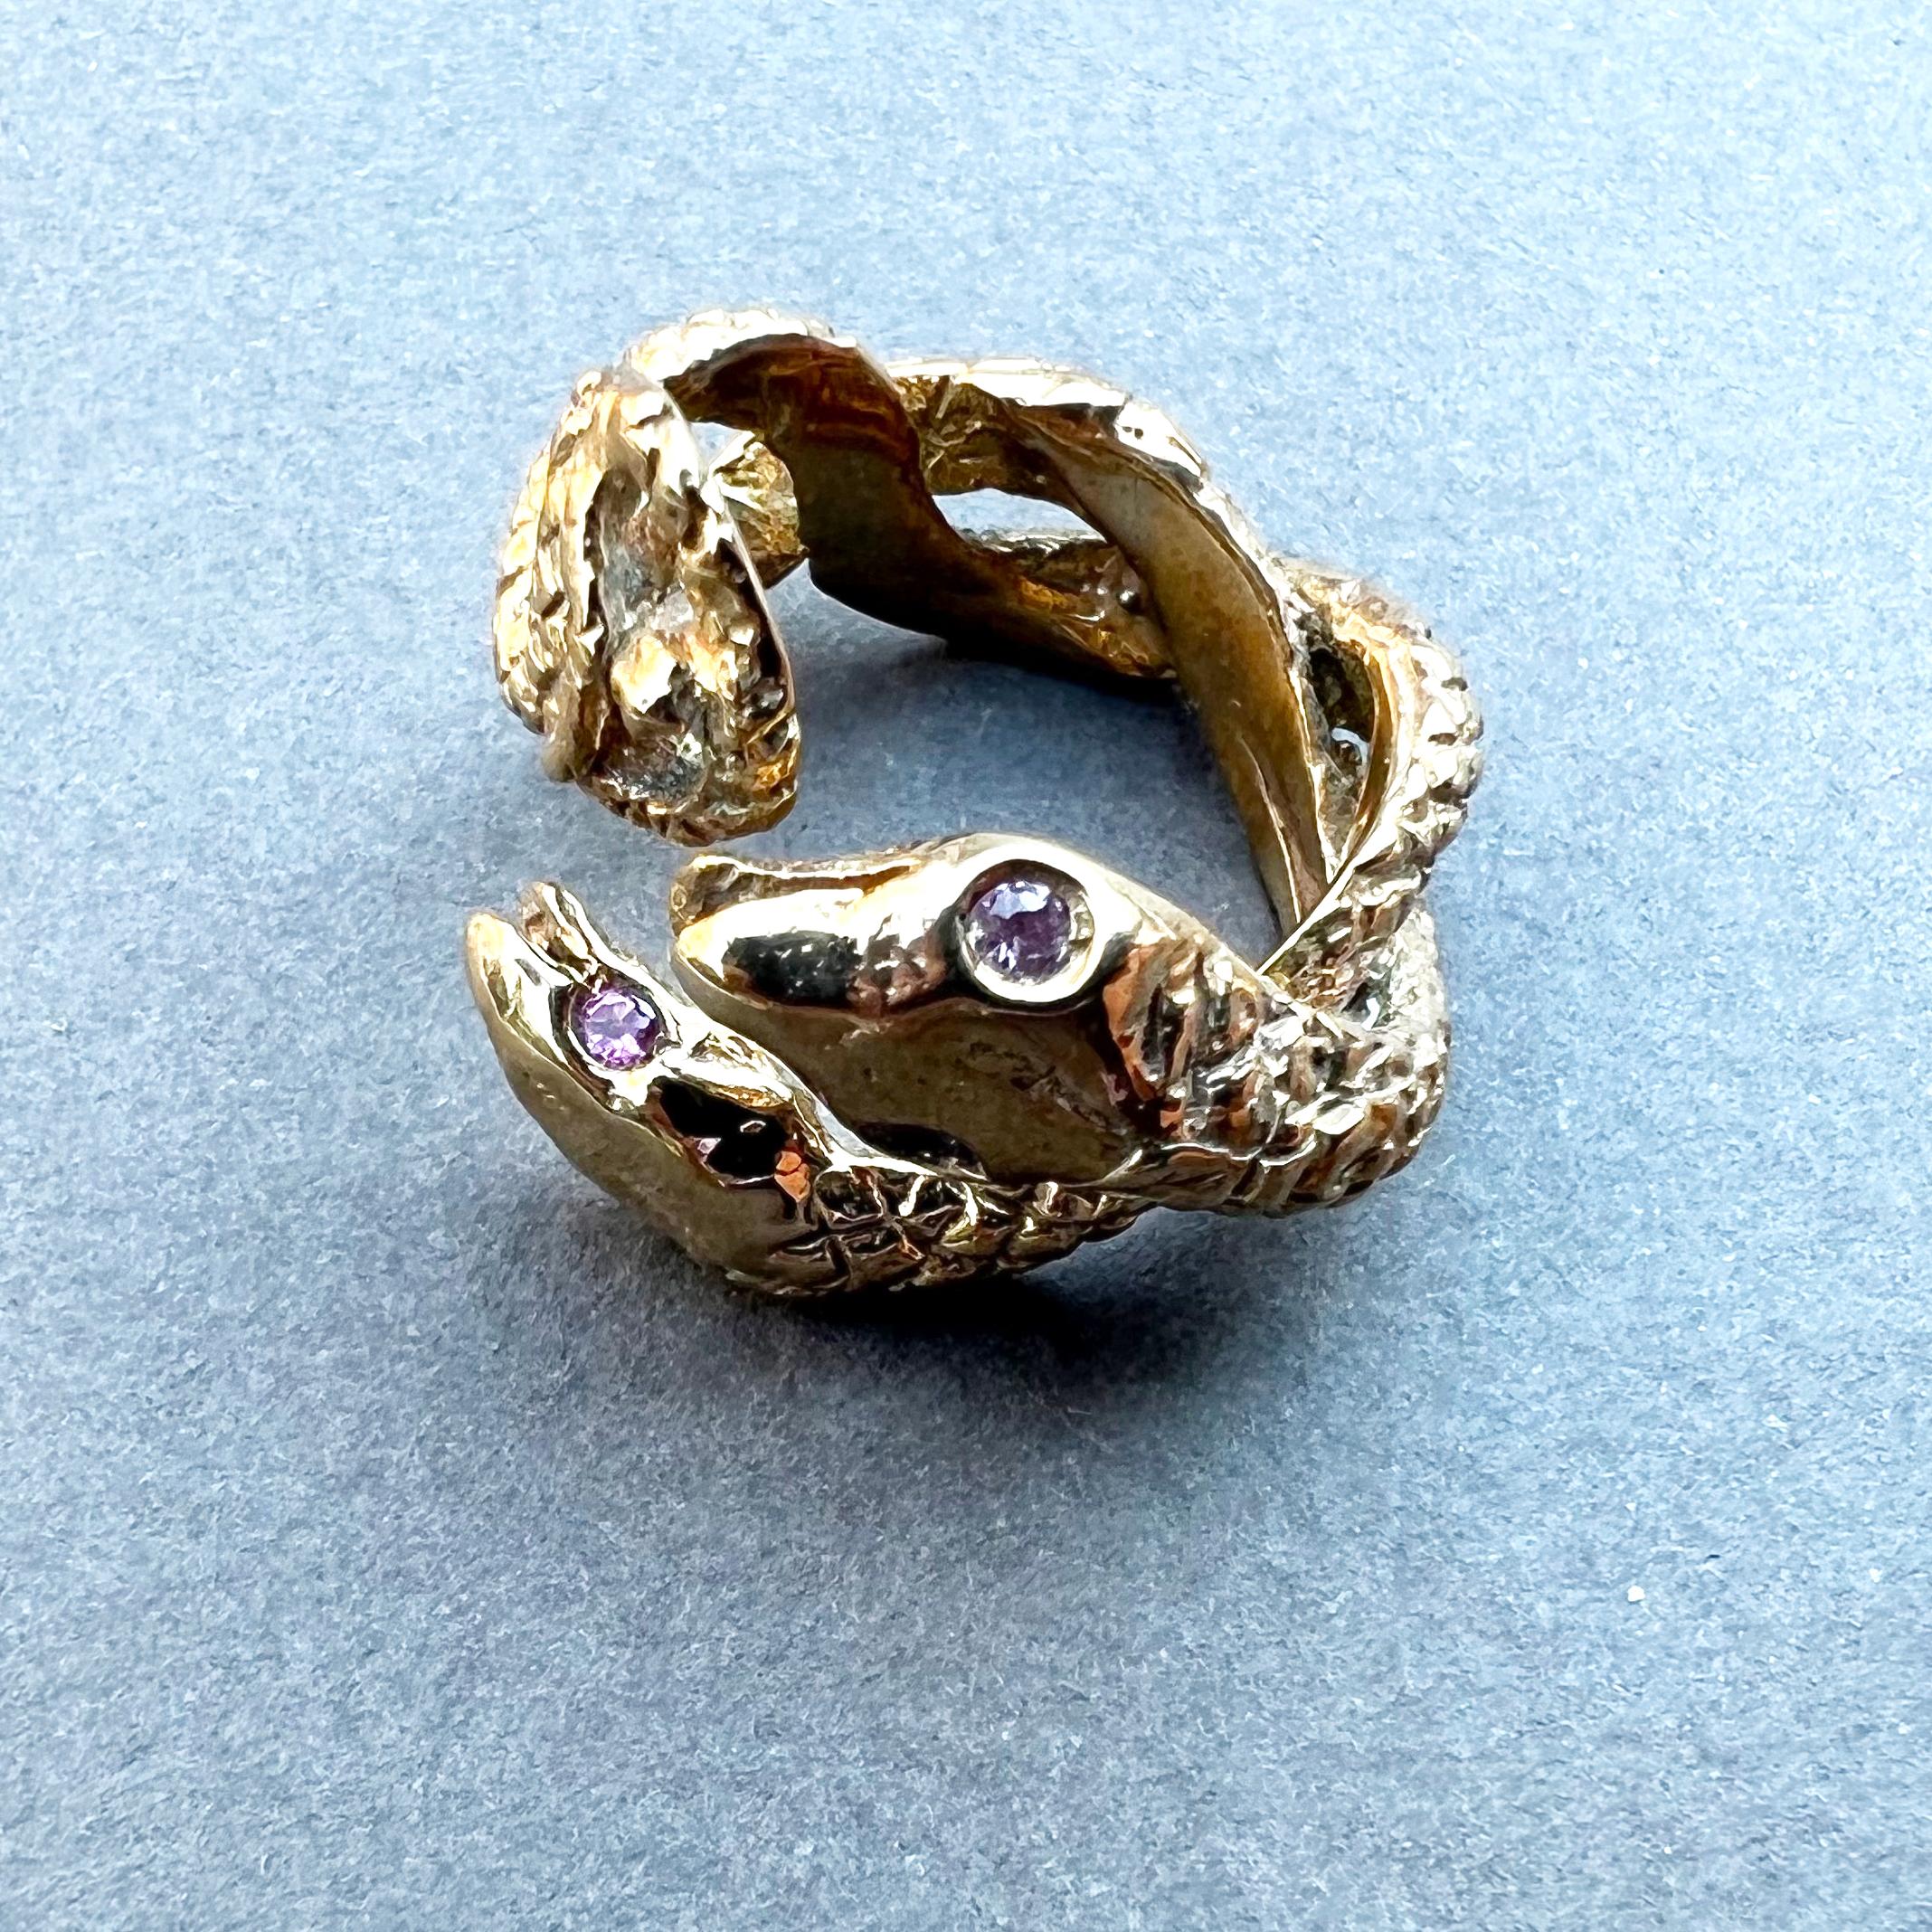 4 pcs Pink Sapphire Snake Ring Bronze  
By J Dauphin
Cocktail Ring

This ring is adjustable - fits size 6-8

J DAUPHIN 